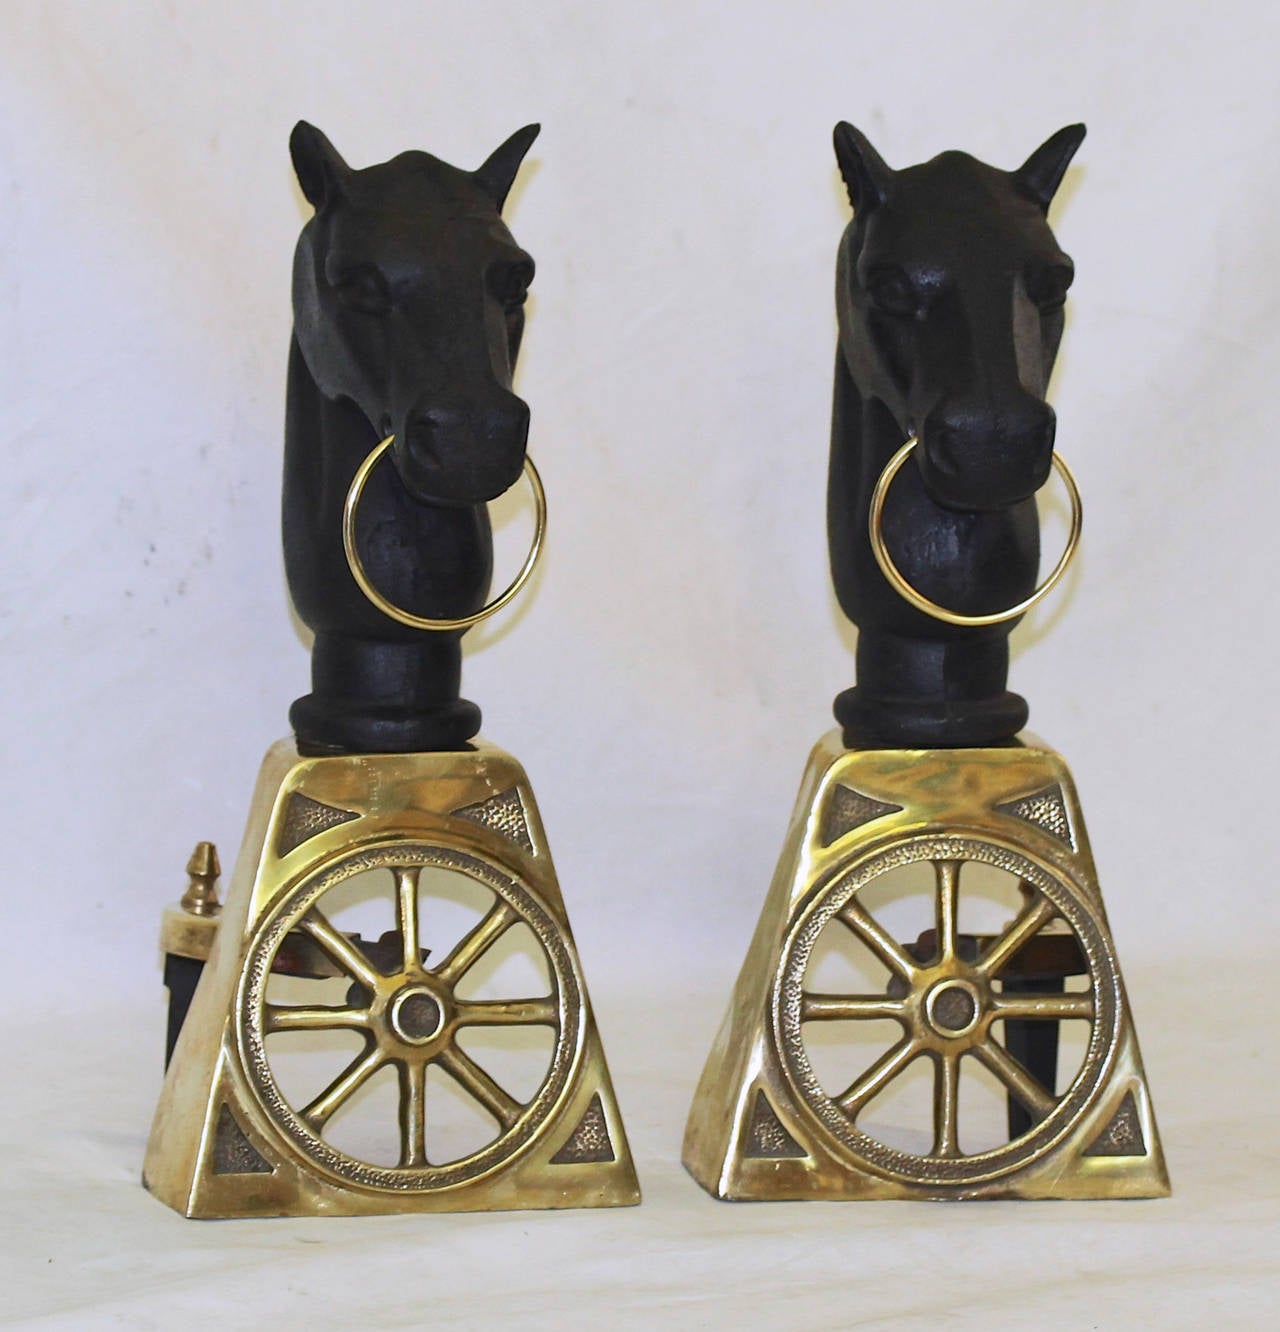 Pair of brass and cast iron andirons with horse head and wagon wheel motif.